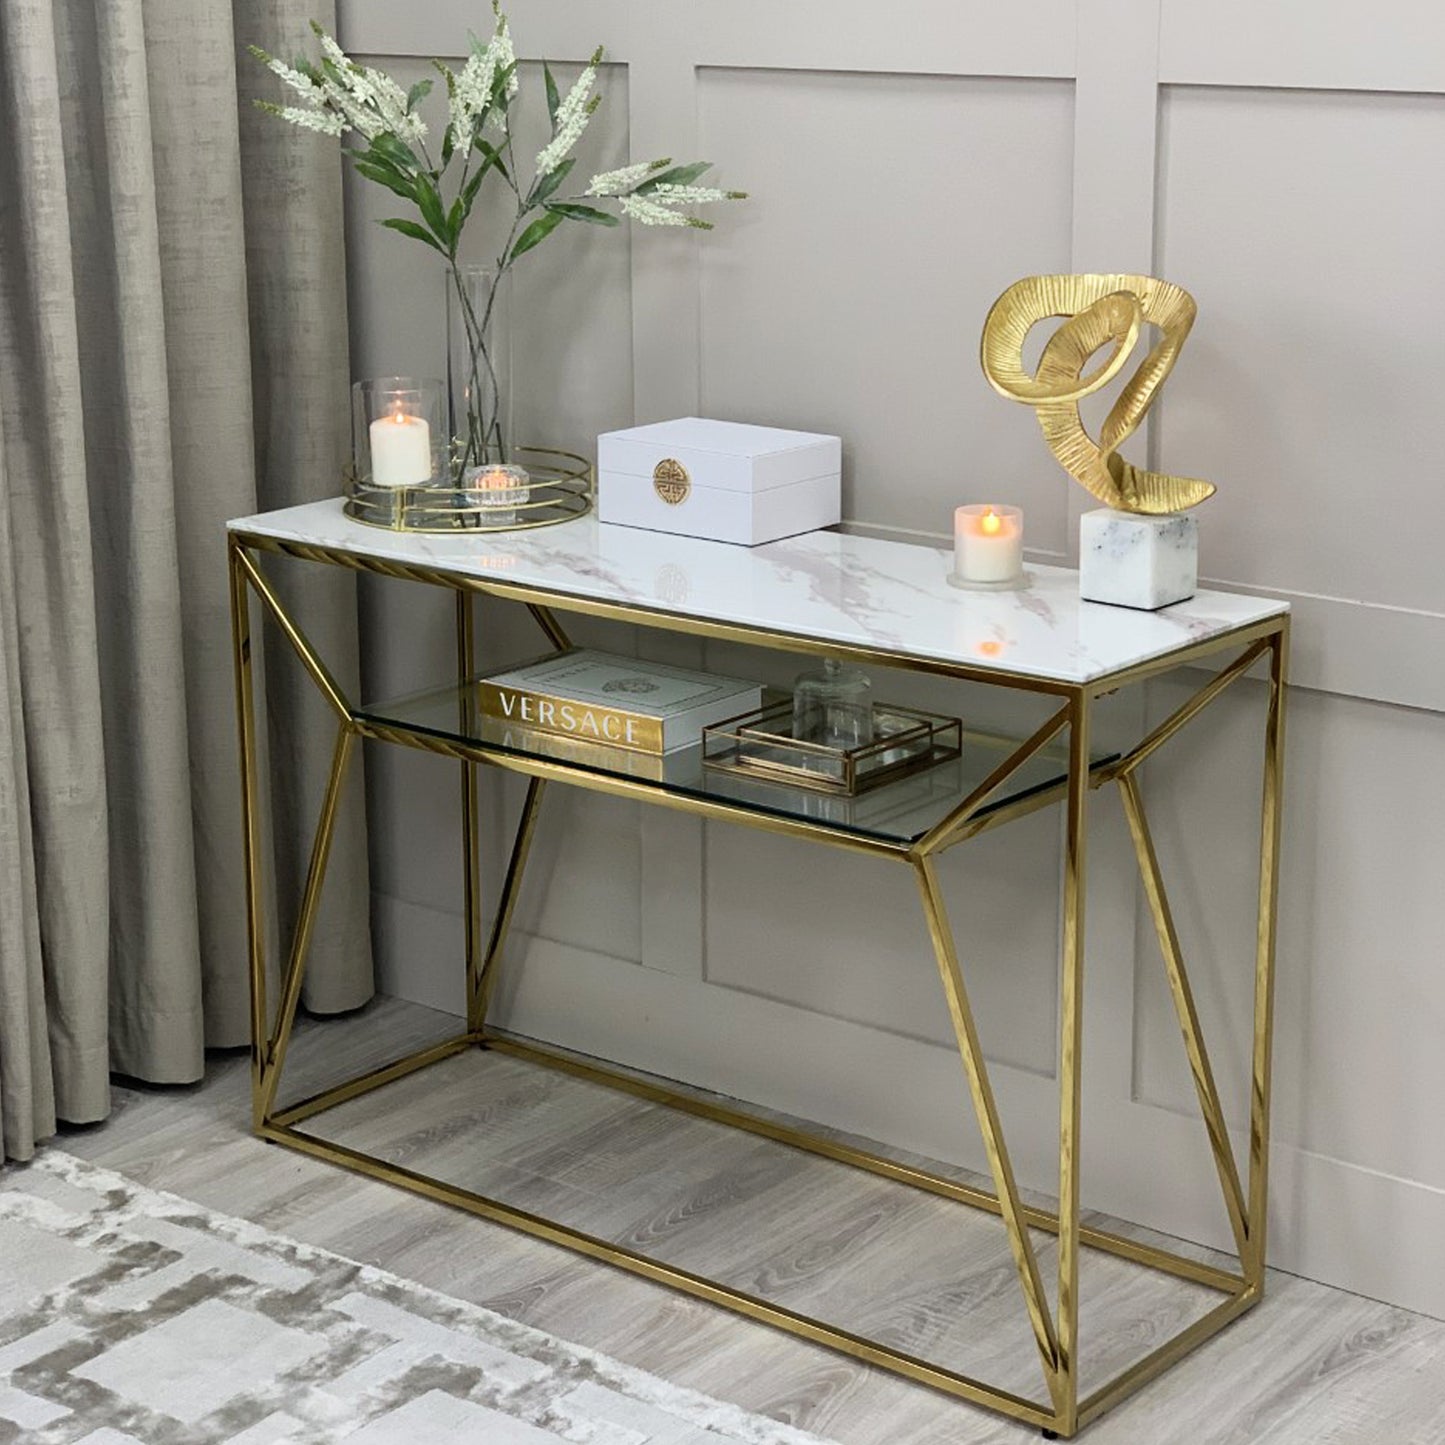 Ava White Marble Effect Console Table With Gold Legs